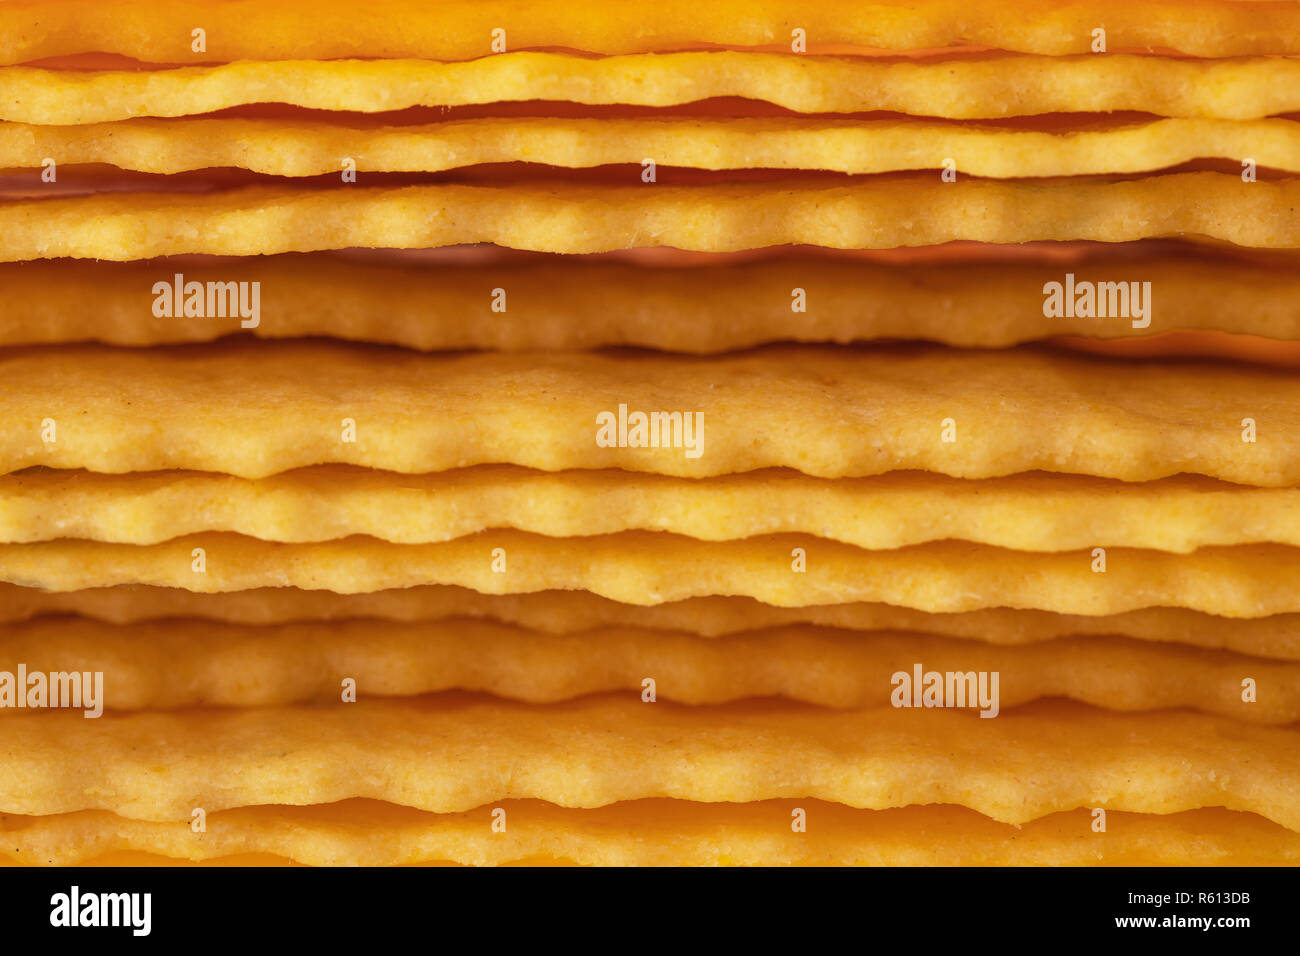 Cheese crackers freshly baked as texture background. Stock Photo